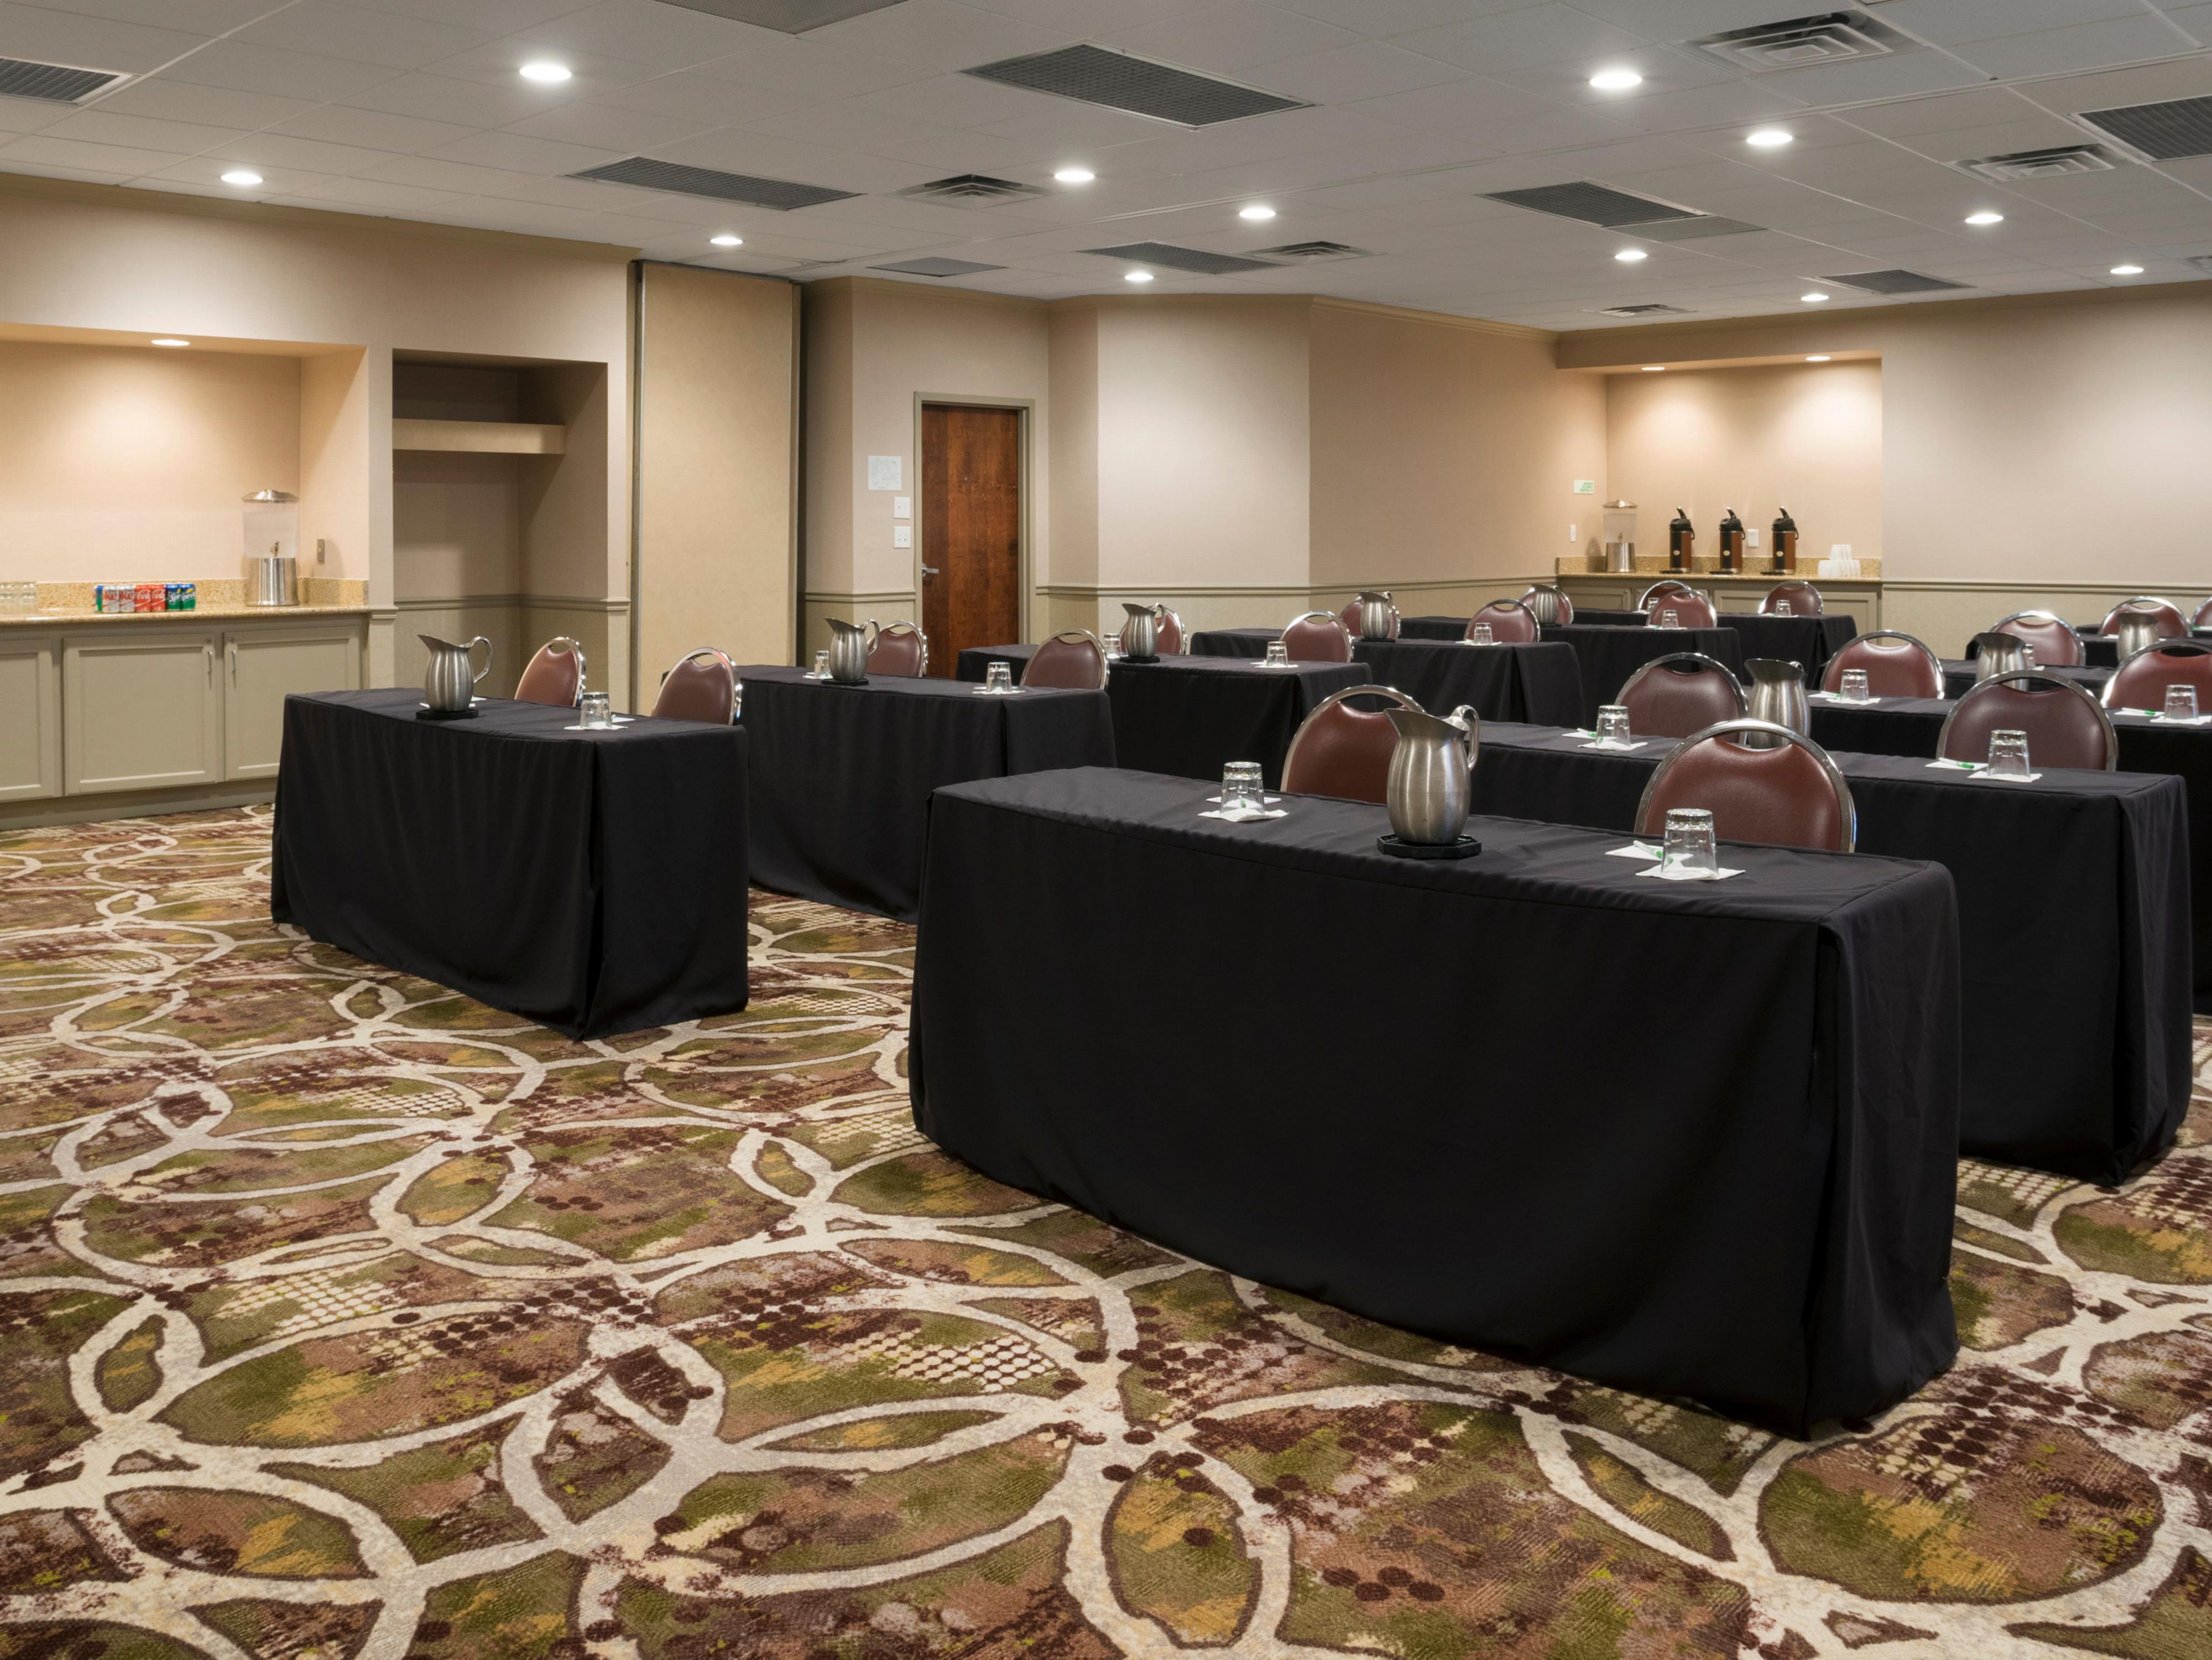 If you're looking for hotels near Cincinnati with ample event space, consider staying at our property, which features over 3,500 sq ft of flexible meeting and banquet space. Three different rooms combine to accommodate 150 people in a theater setup.